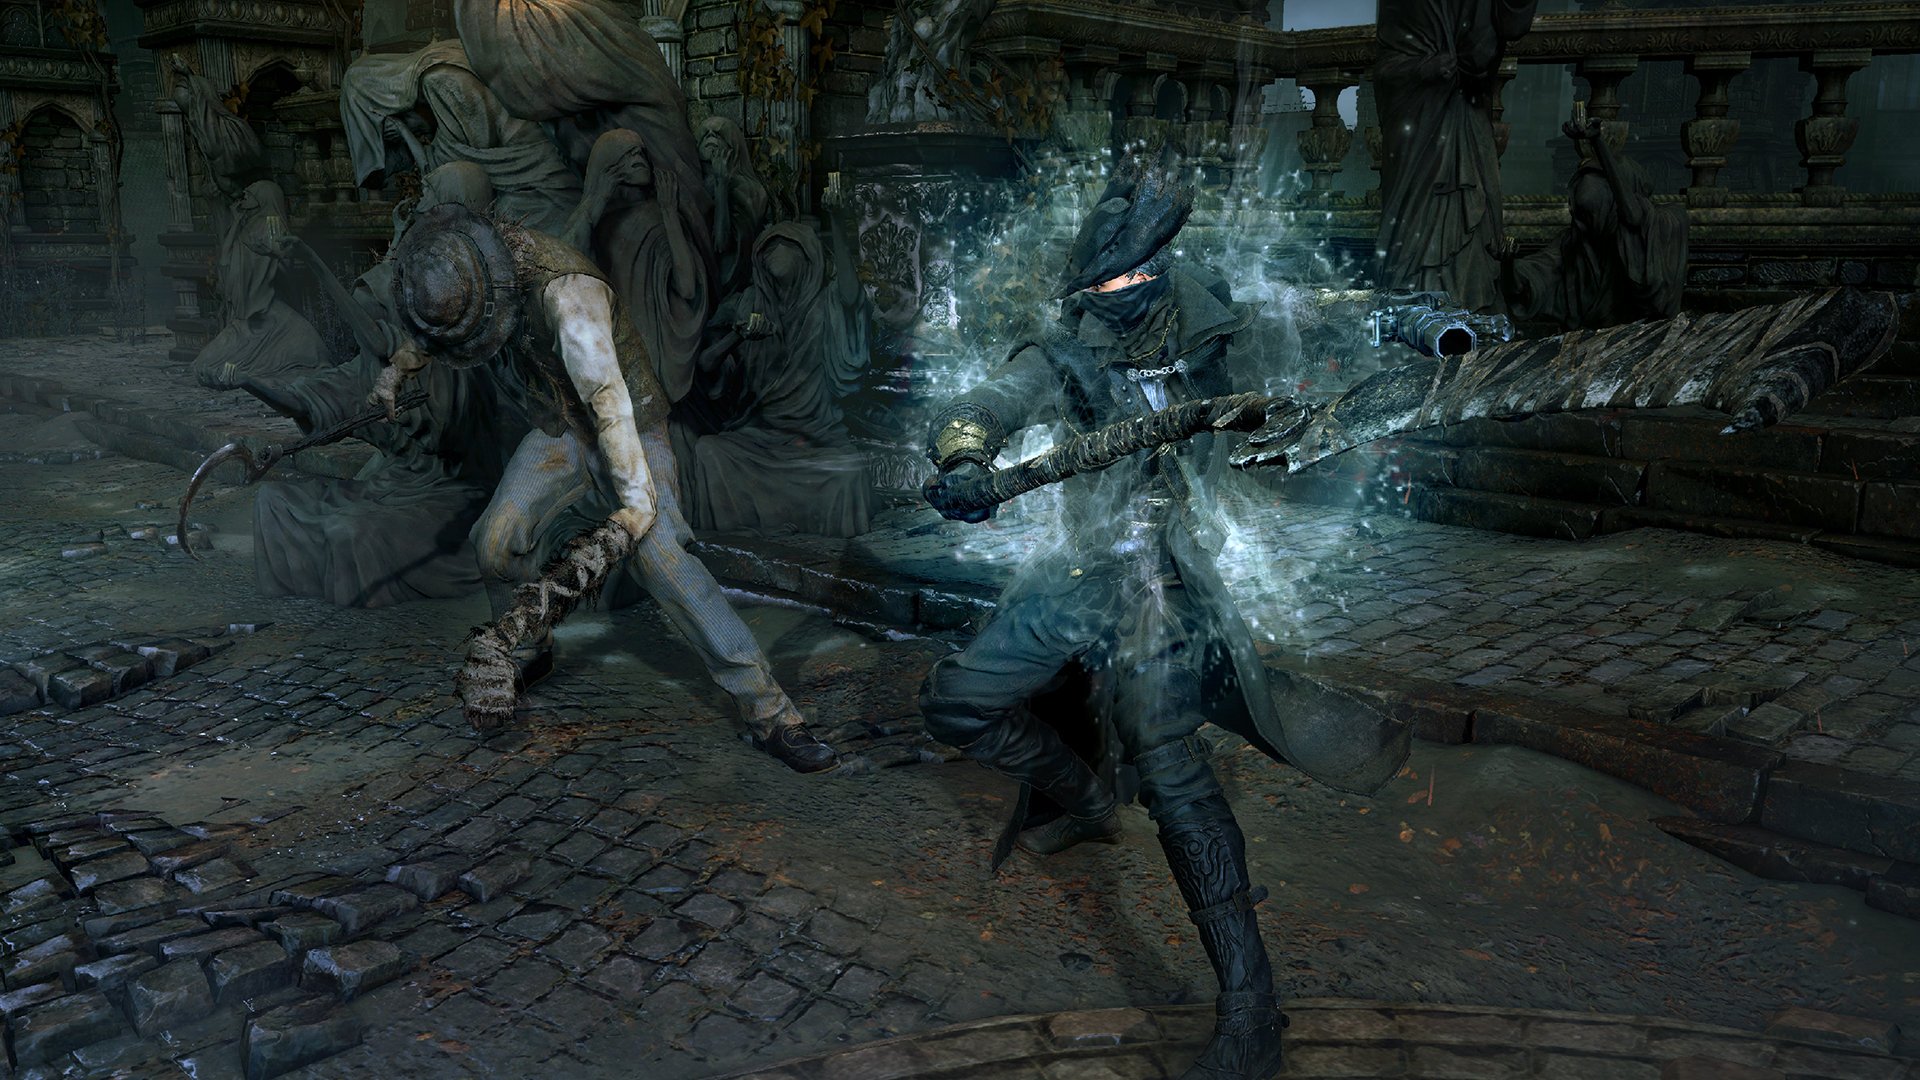 Bloodborne Patched To at 60 FPS On PS4 But With a Limitation [Update]